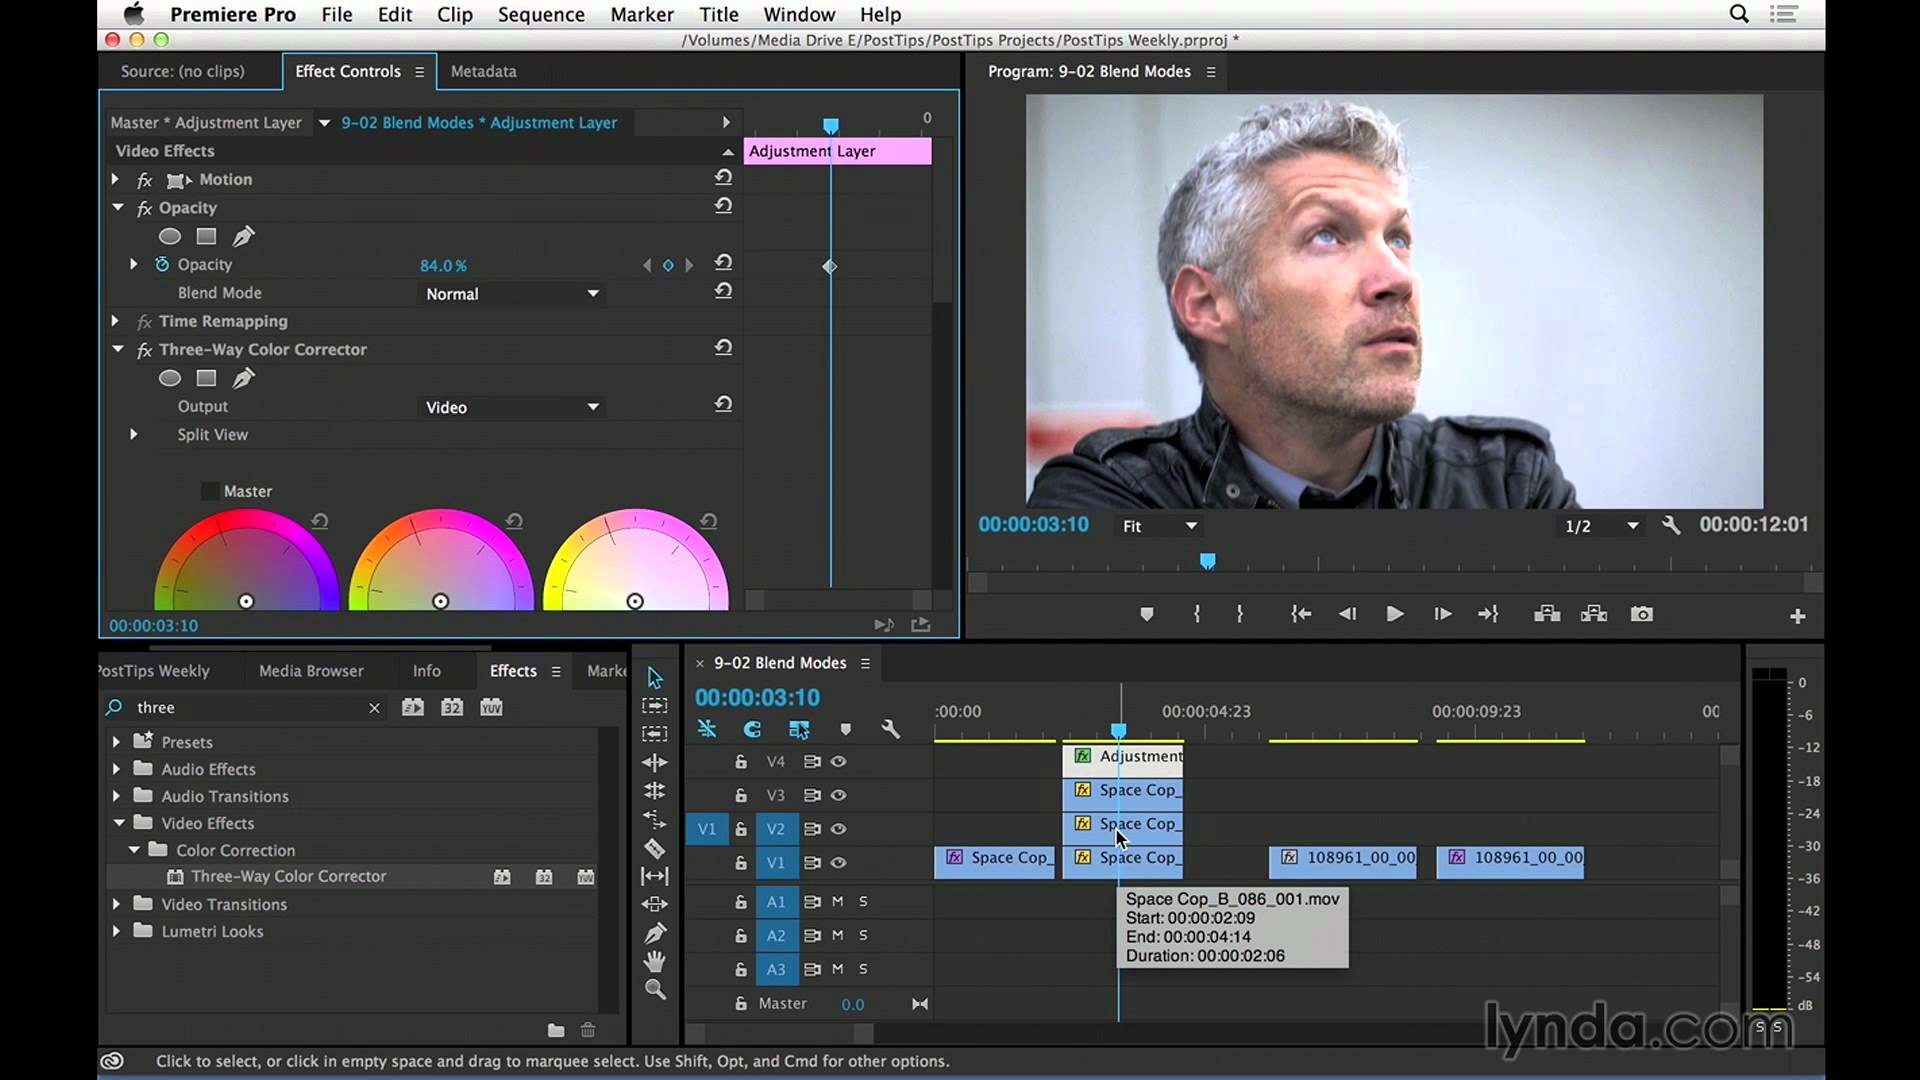 Adobe Just Fixed A Ton of Bugs and Added Stability Enhancements to Premiere Pro CC 2015